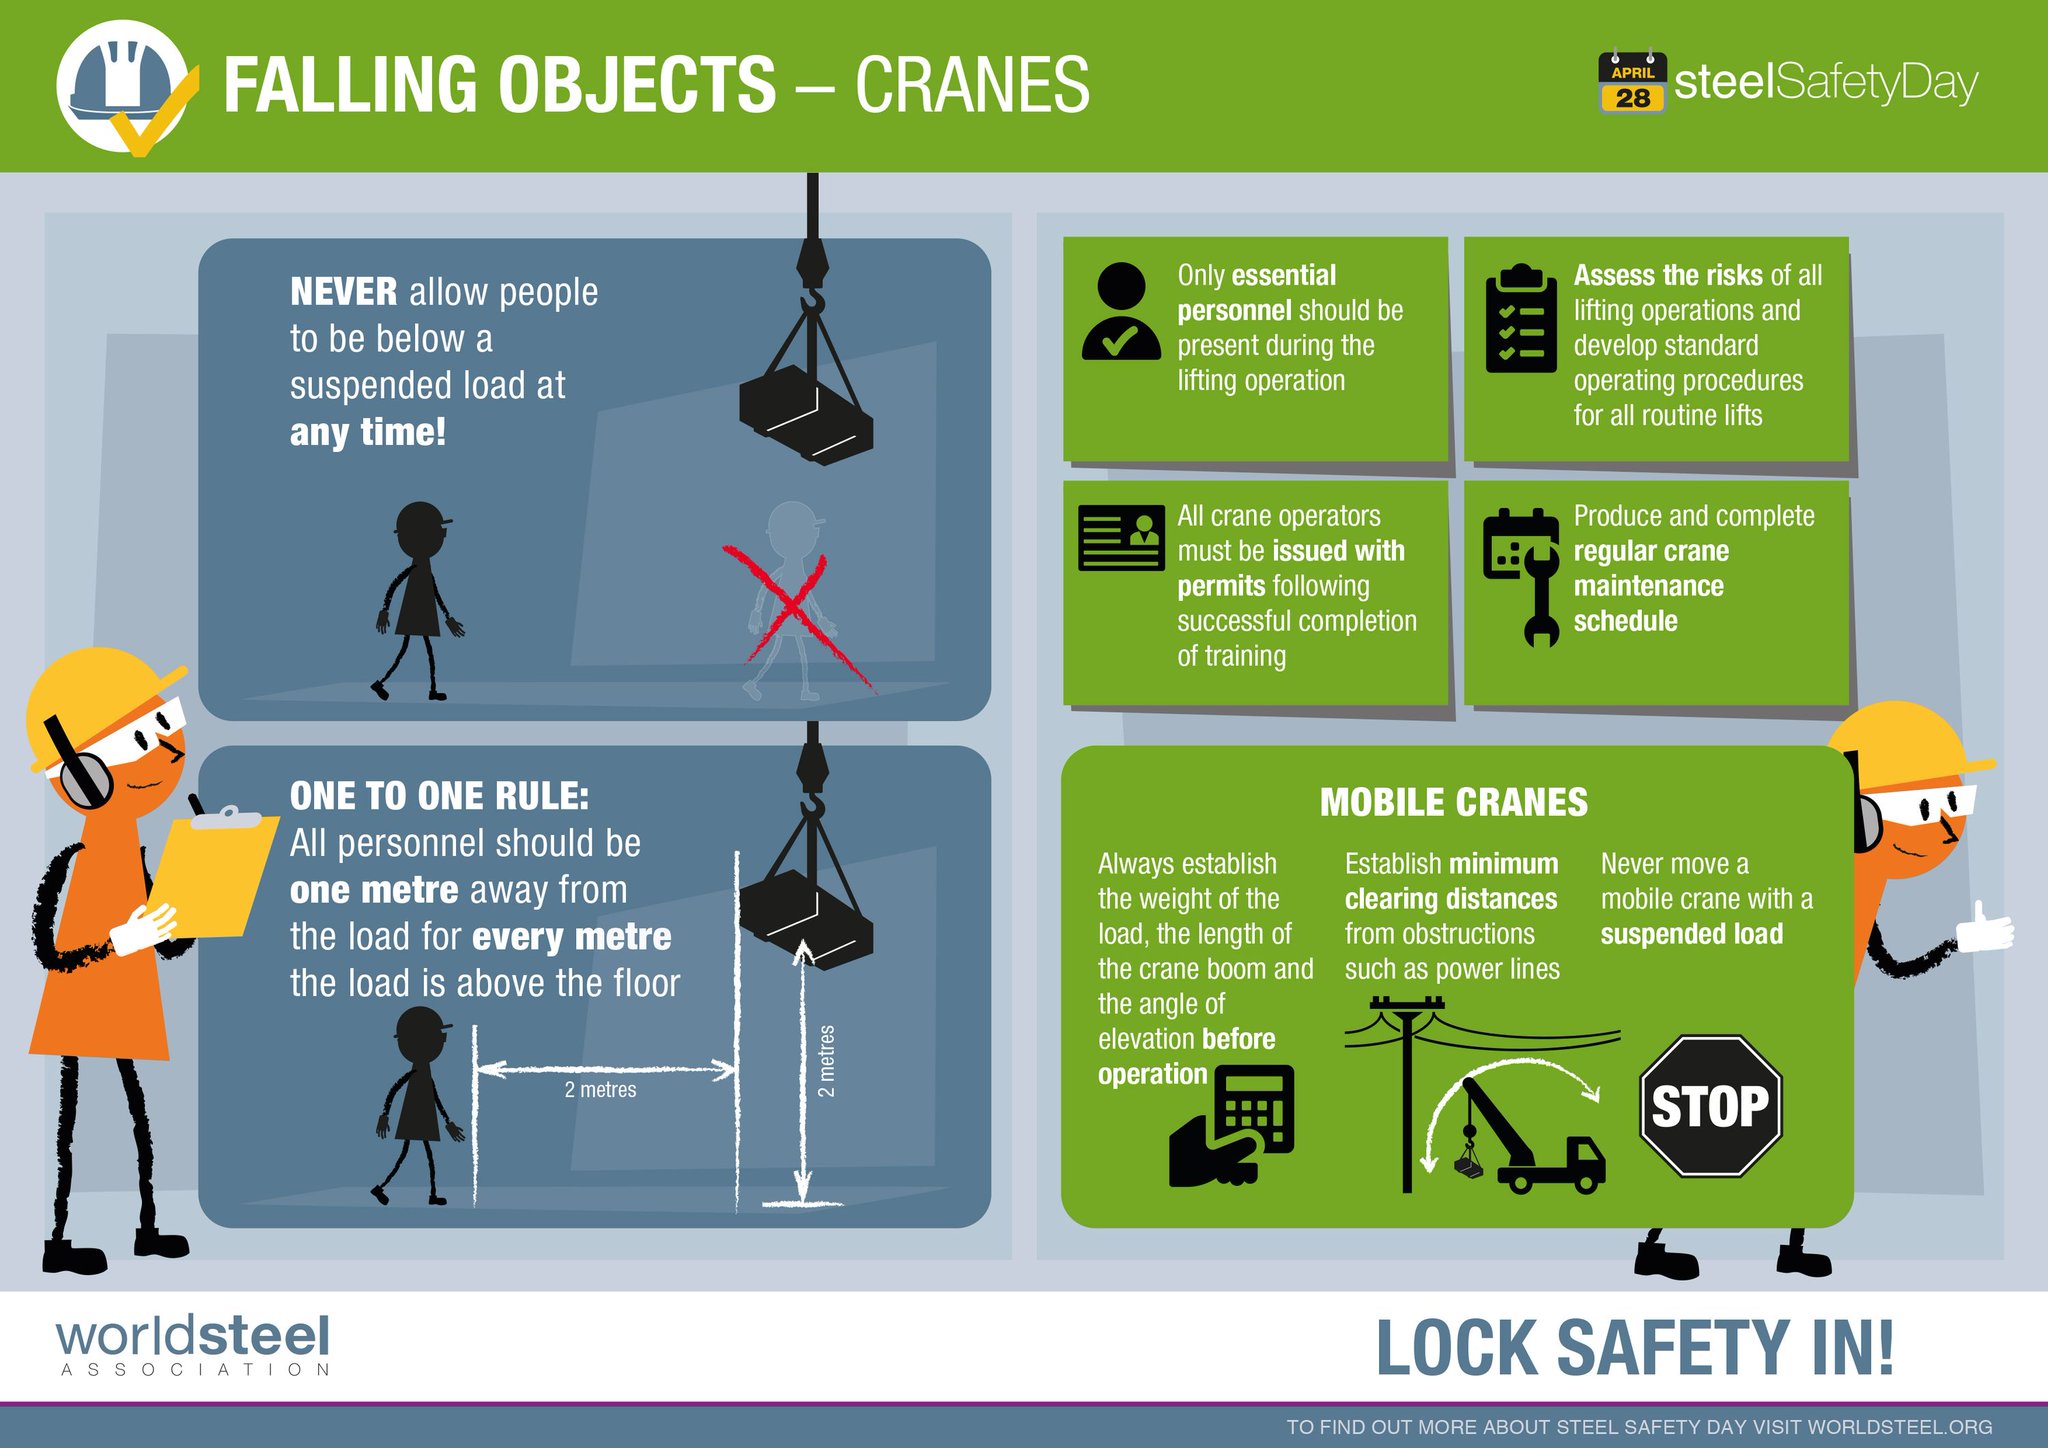 CELSA Steel UK on Twitter: "Are you prepared to lock safety in? Here are a few tips from ...